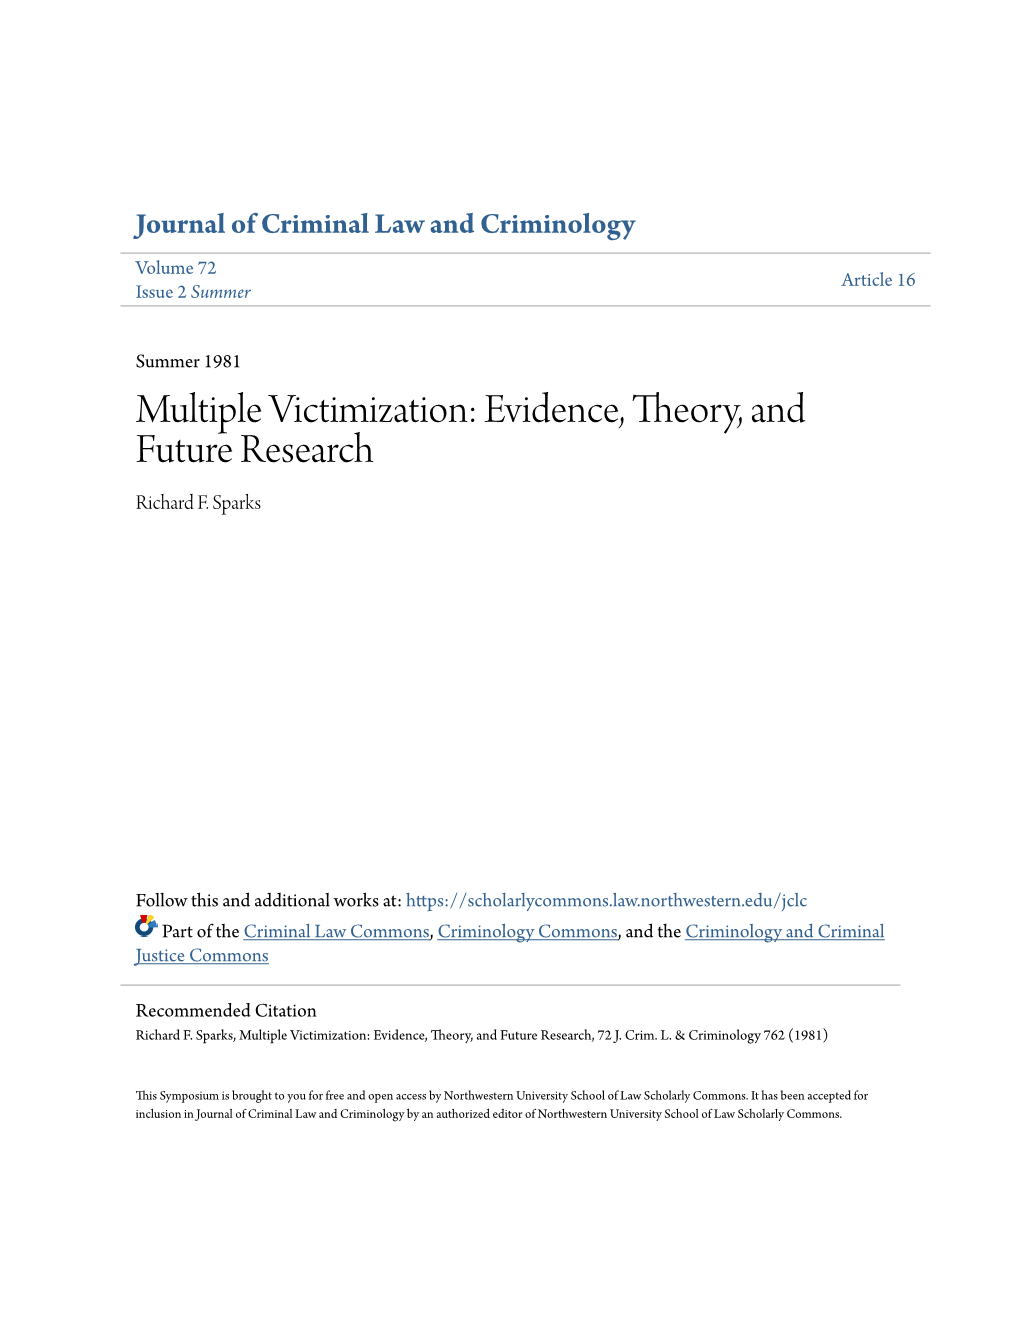 Multiple Victimization: Evidence, Theory, and Future Research Richard F